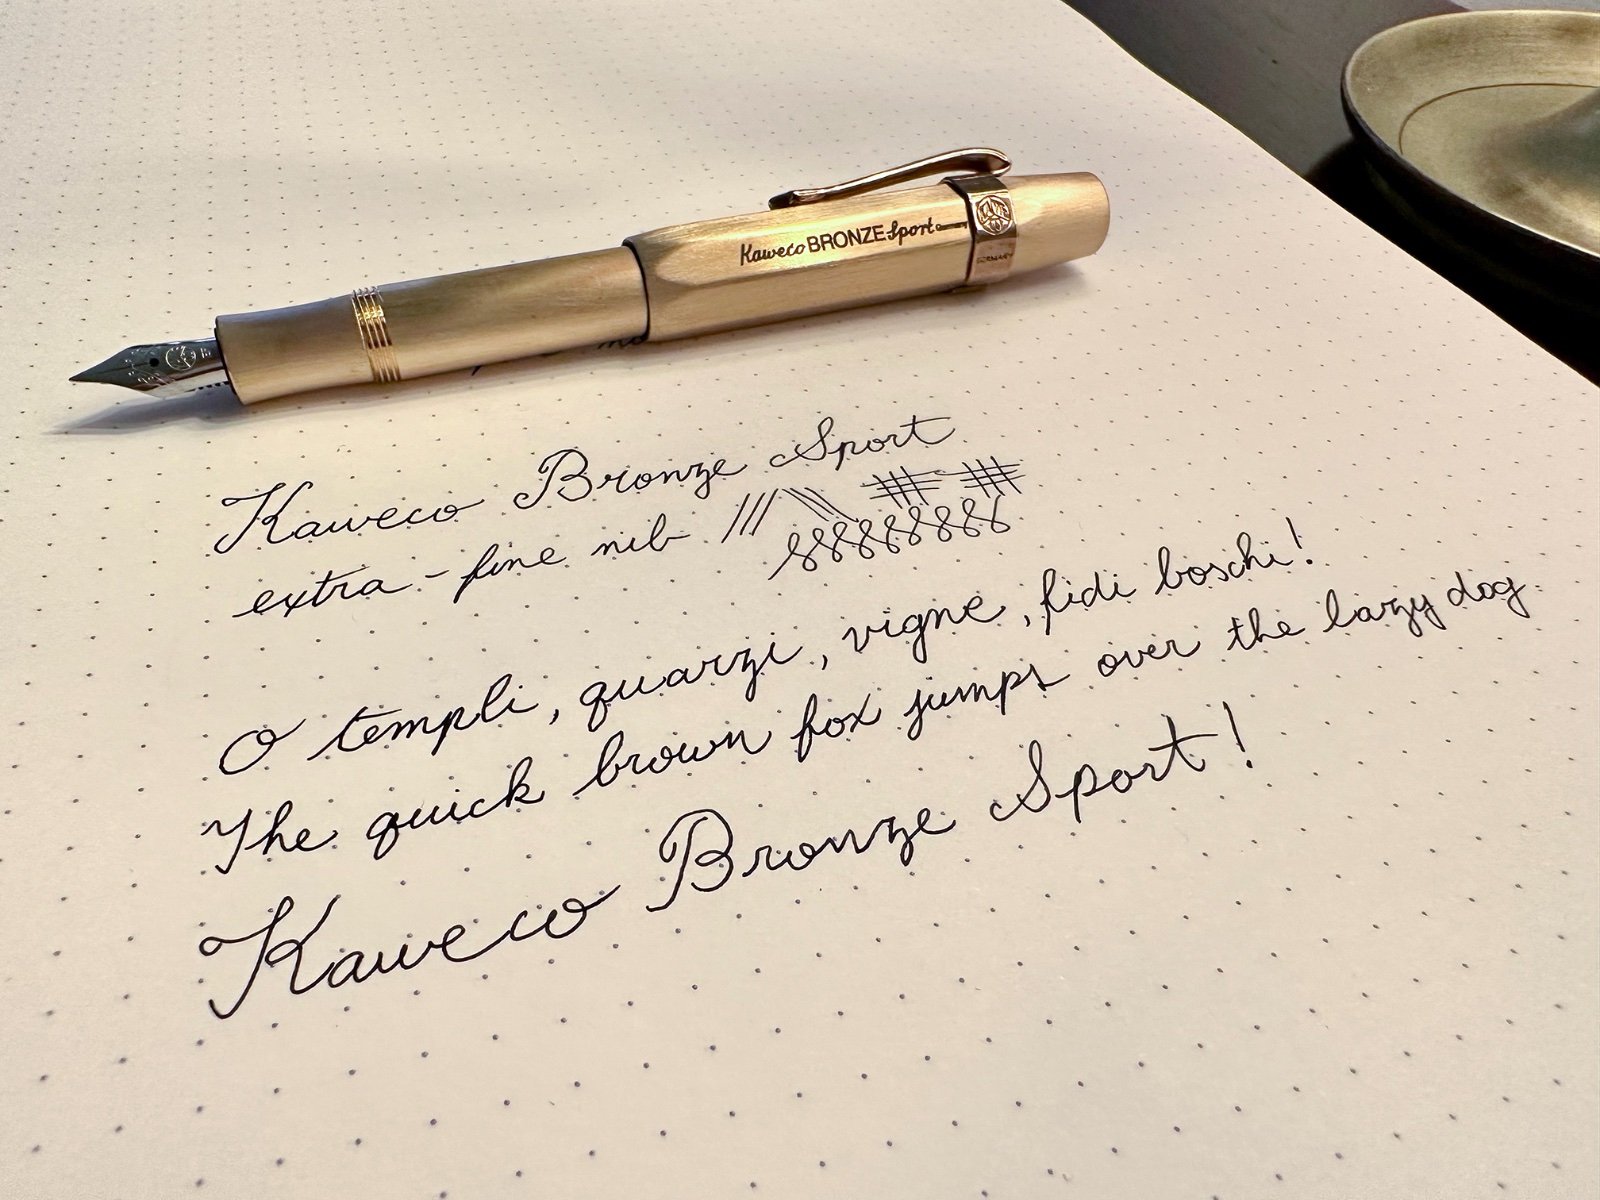 At this point, Kaweco Bronze and Brass look quite similar. I like